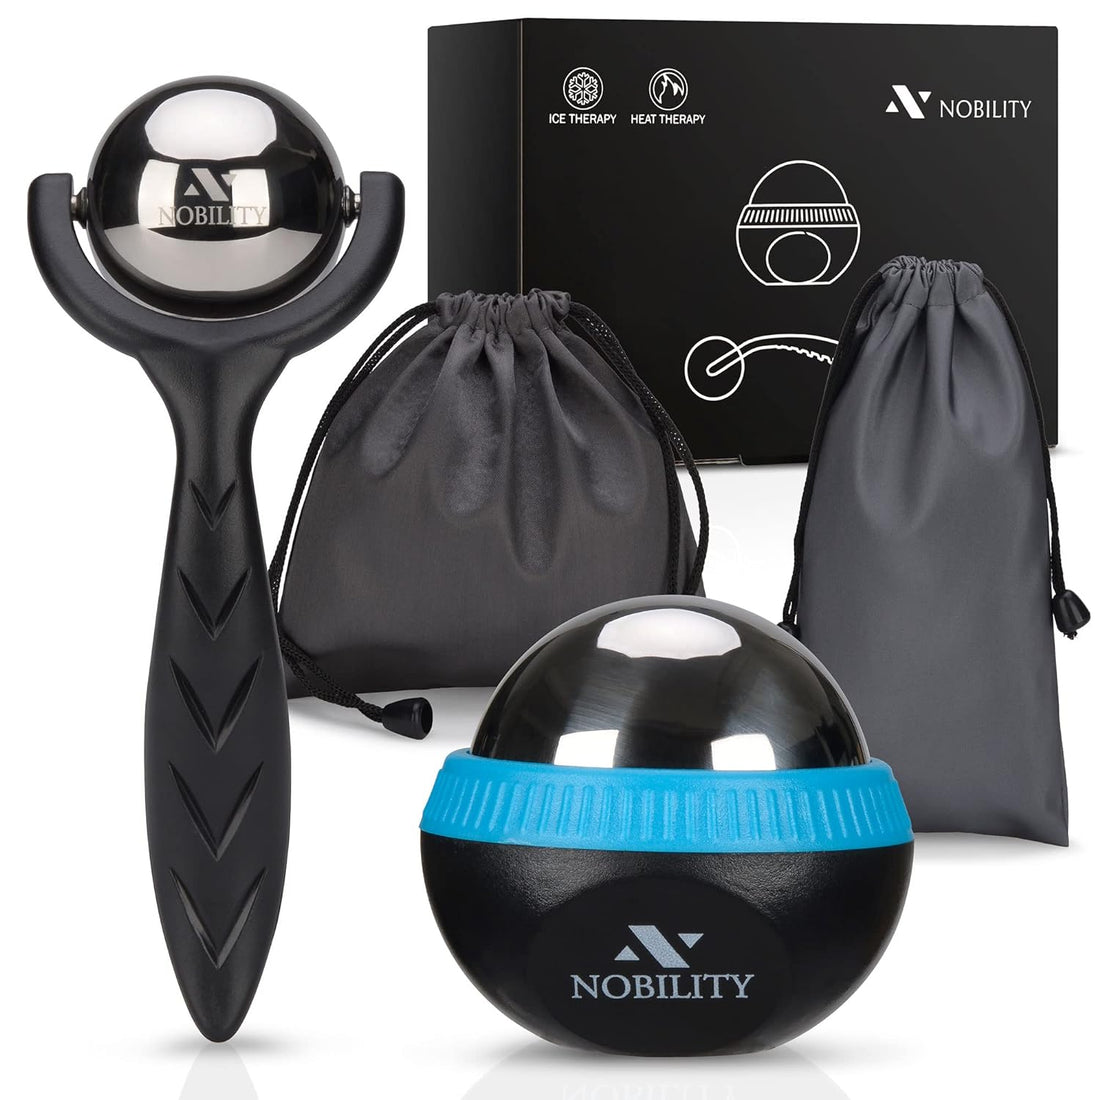 Nobility Steel Massage Ball – Ice Cold and Hot for Deep Tissue and Sore Muscle Relief of Stiffness and Stress, Body, Neck, Back, Foot, Plantar Fasciitis